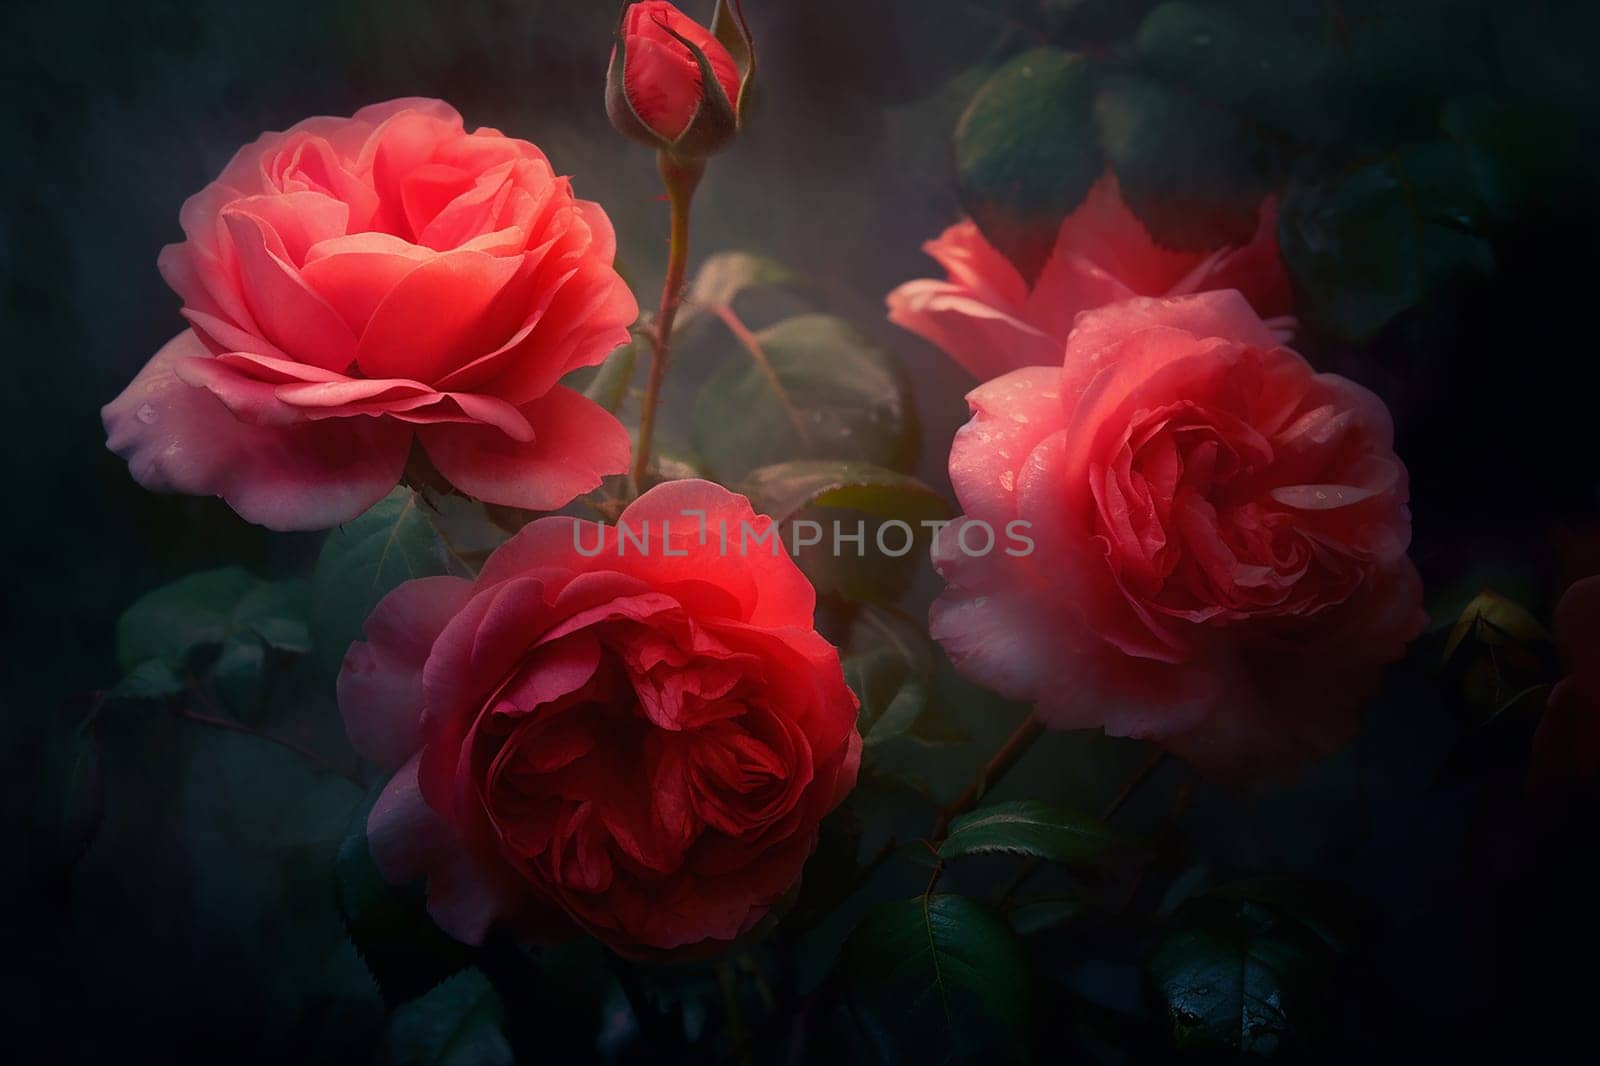 Beautiful pink roses in a misty, enchanting garden setting. by Hype2art